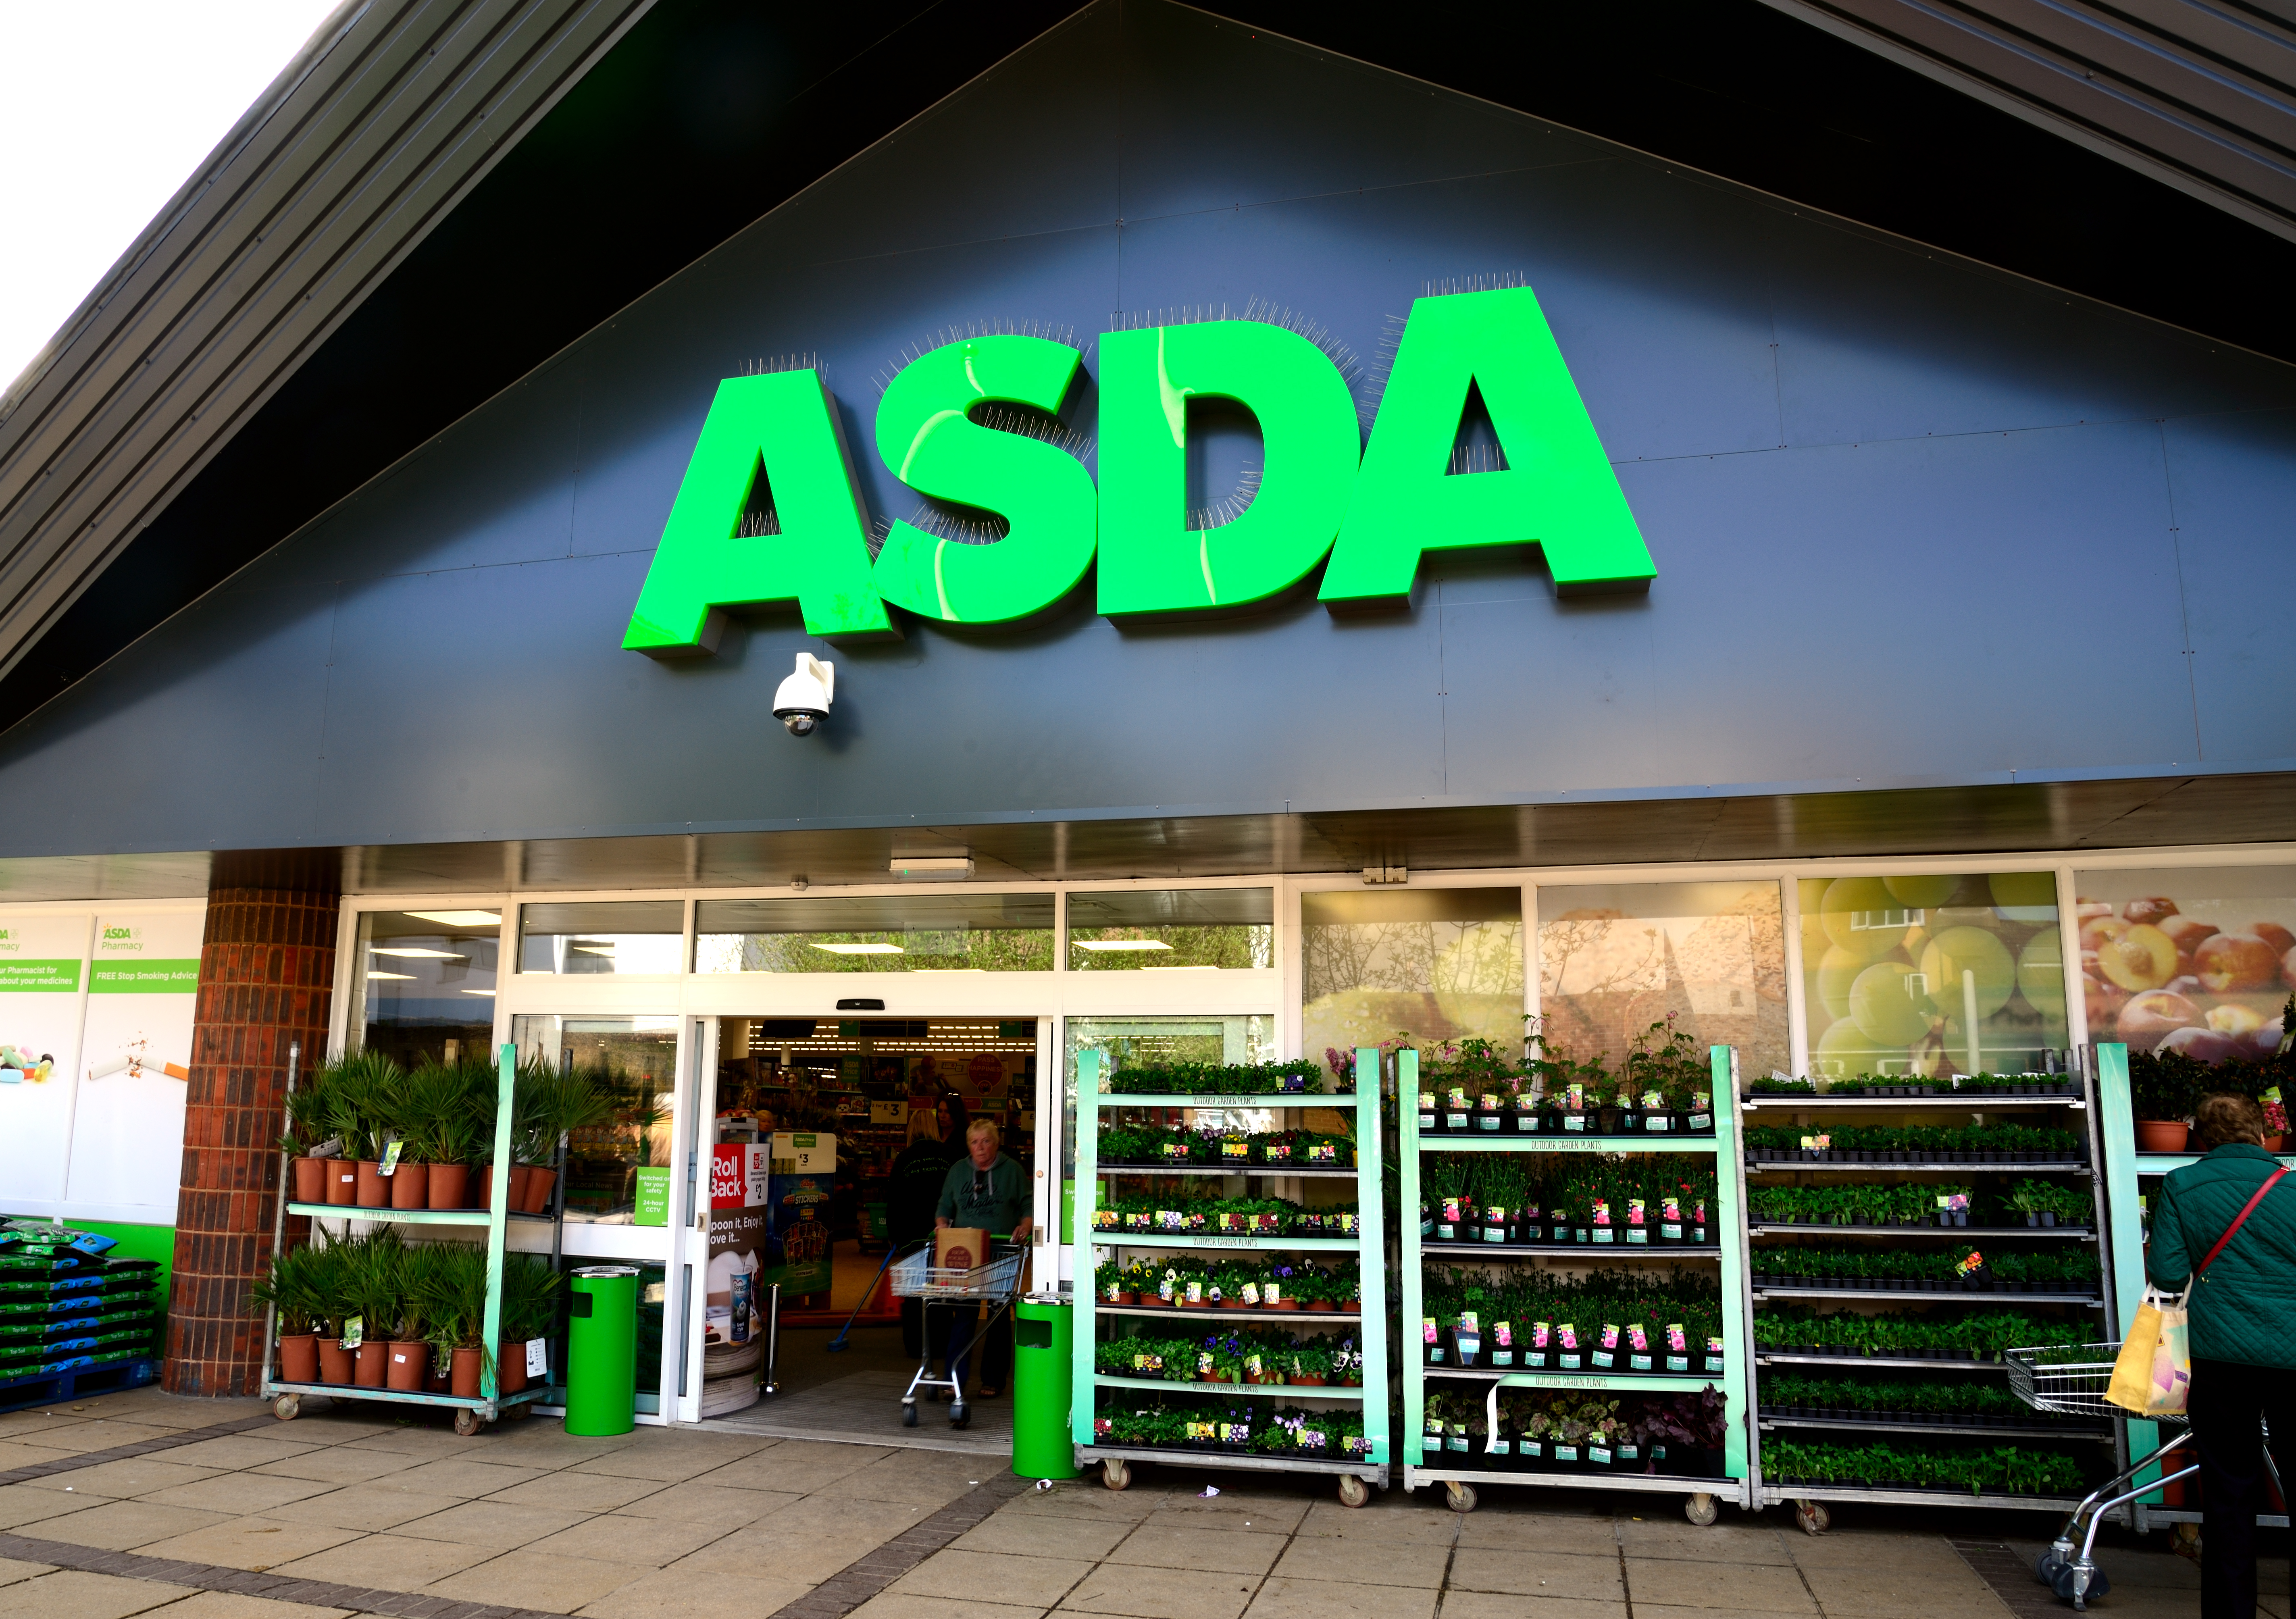 Asda shoppers discovered a bargain just in time for Christmas shopping